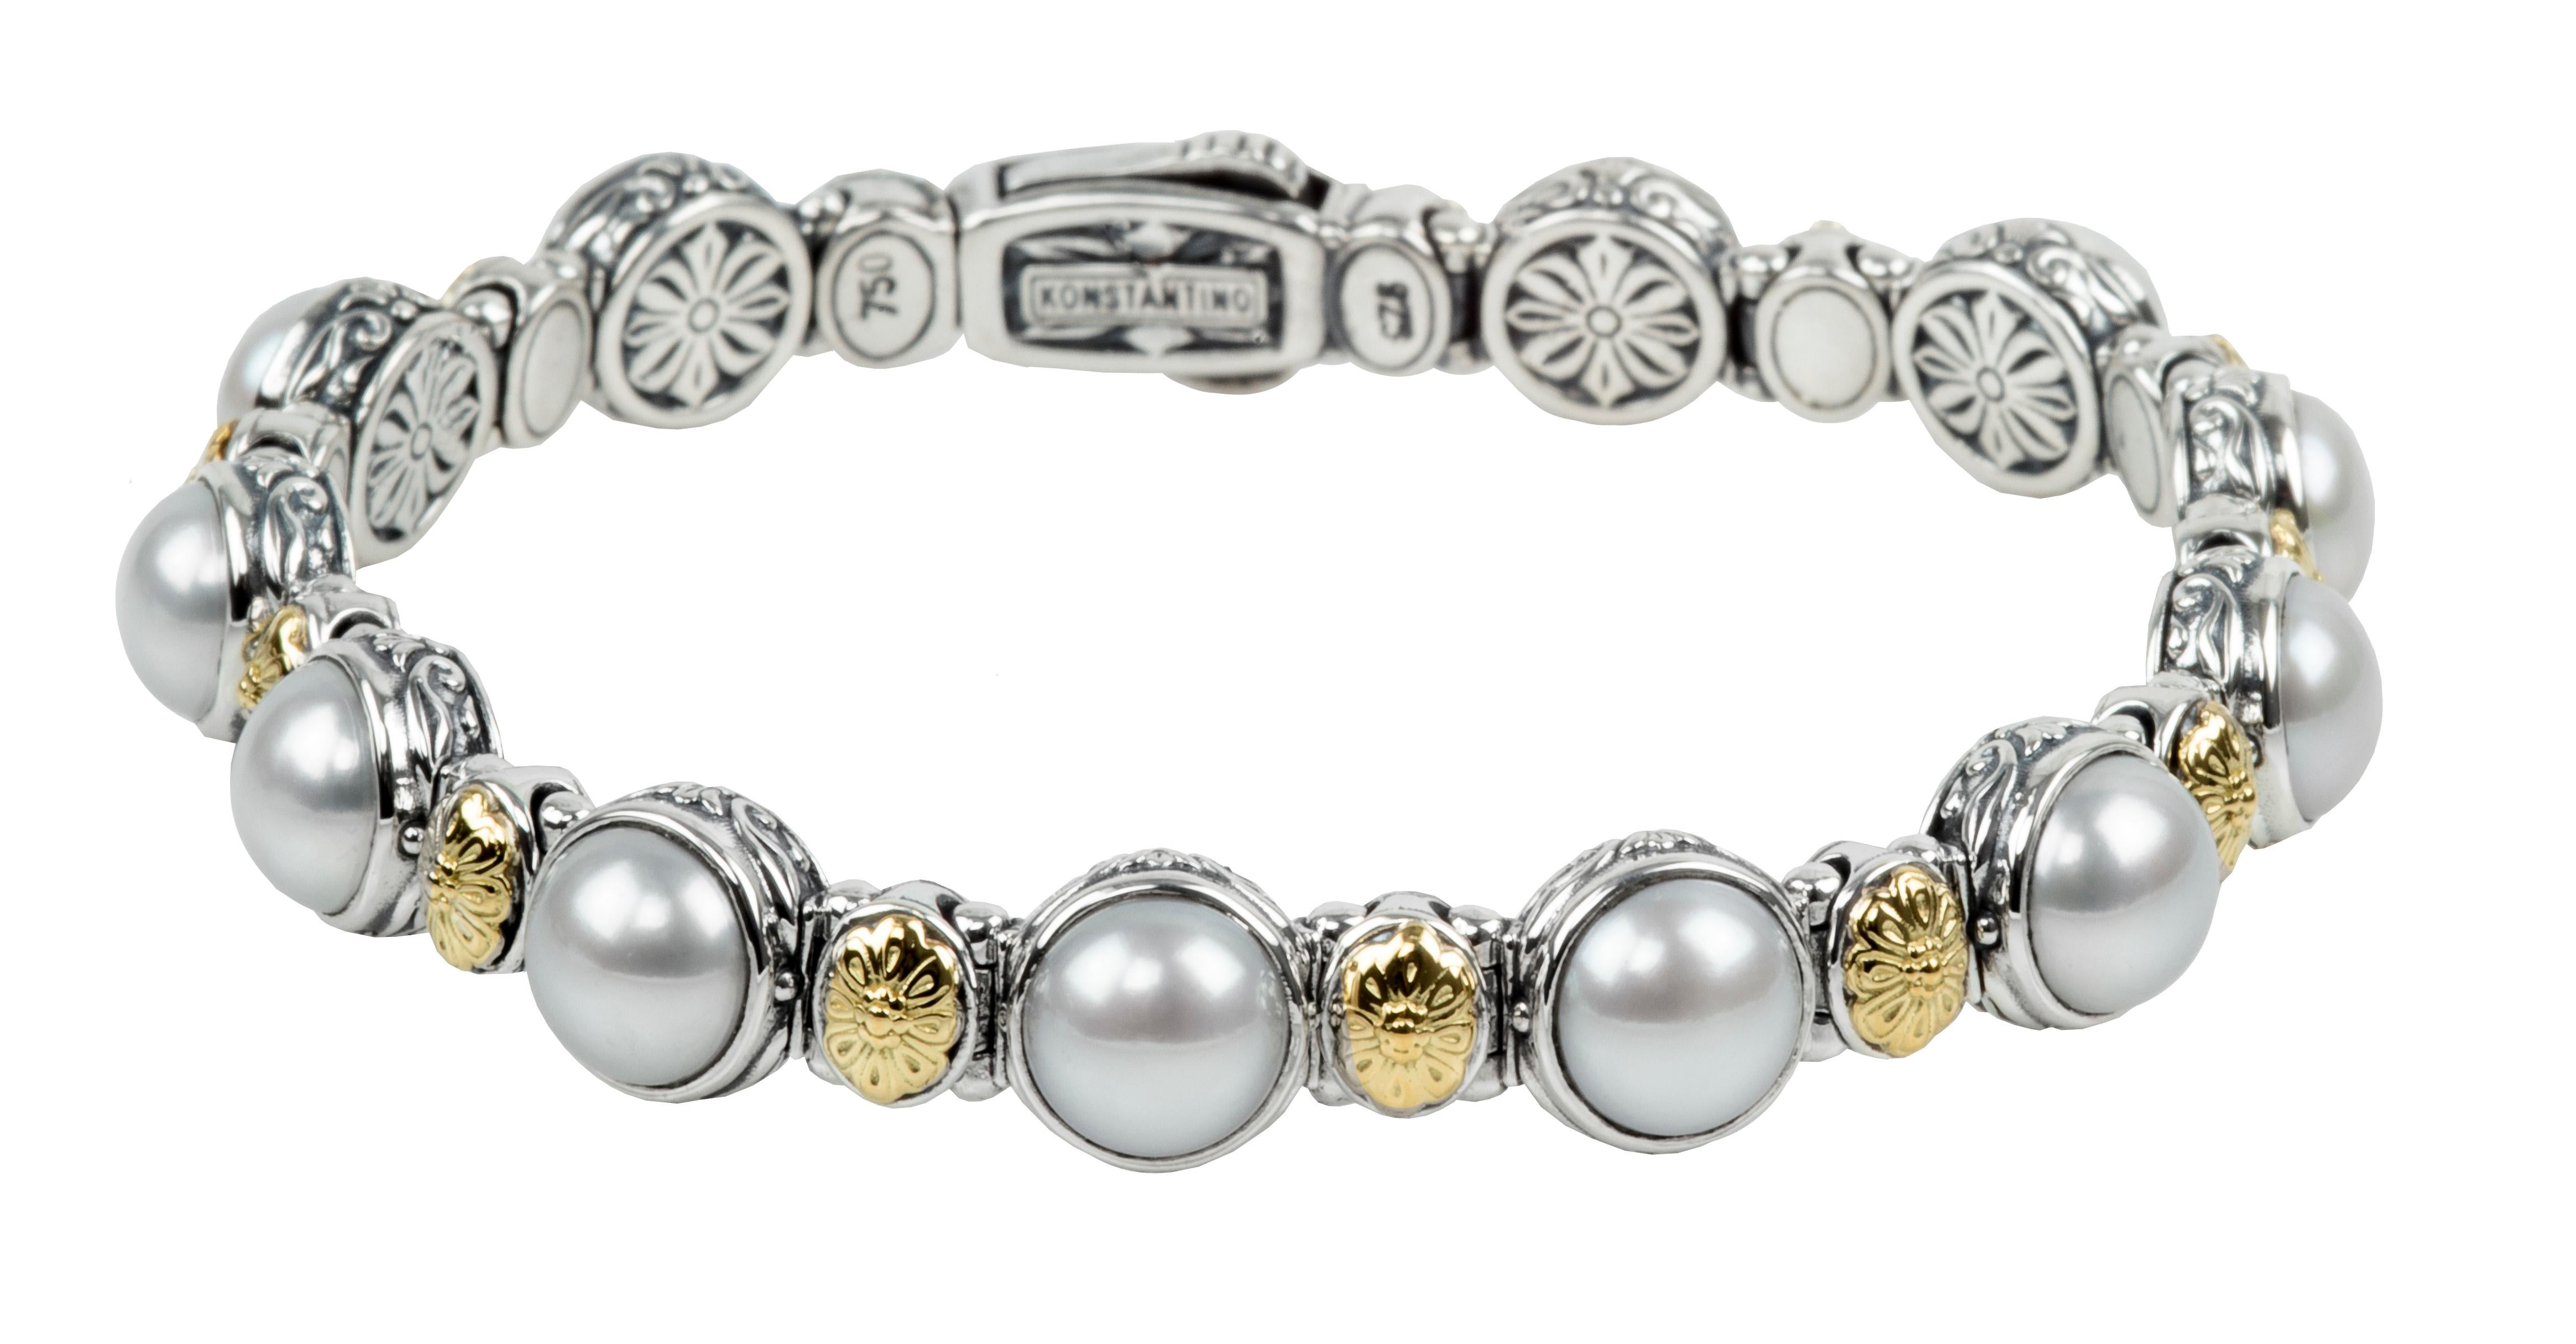 Konstantino Pearl Sterling Silver and Gold Bracelet.  
Stamped Konstantino, 925 and 750.
